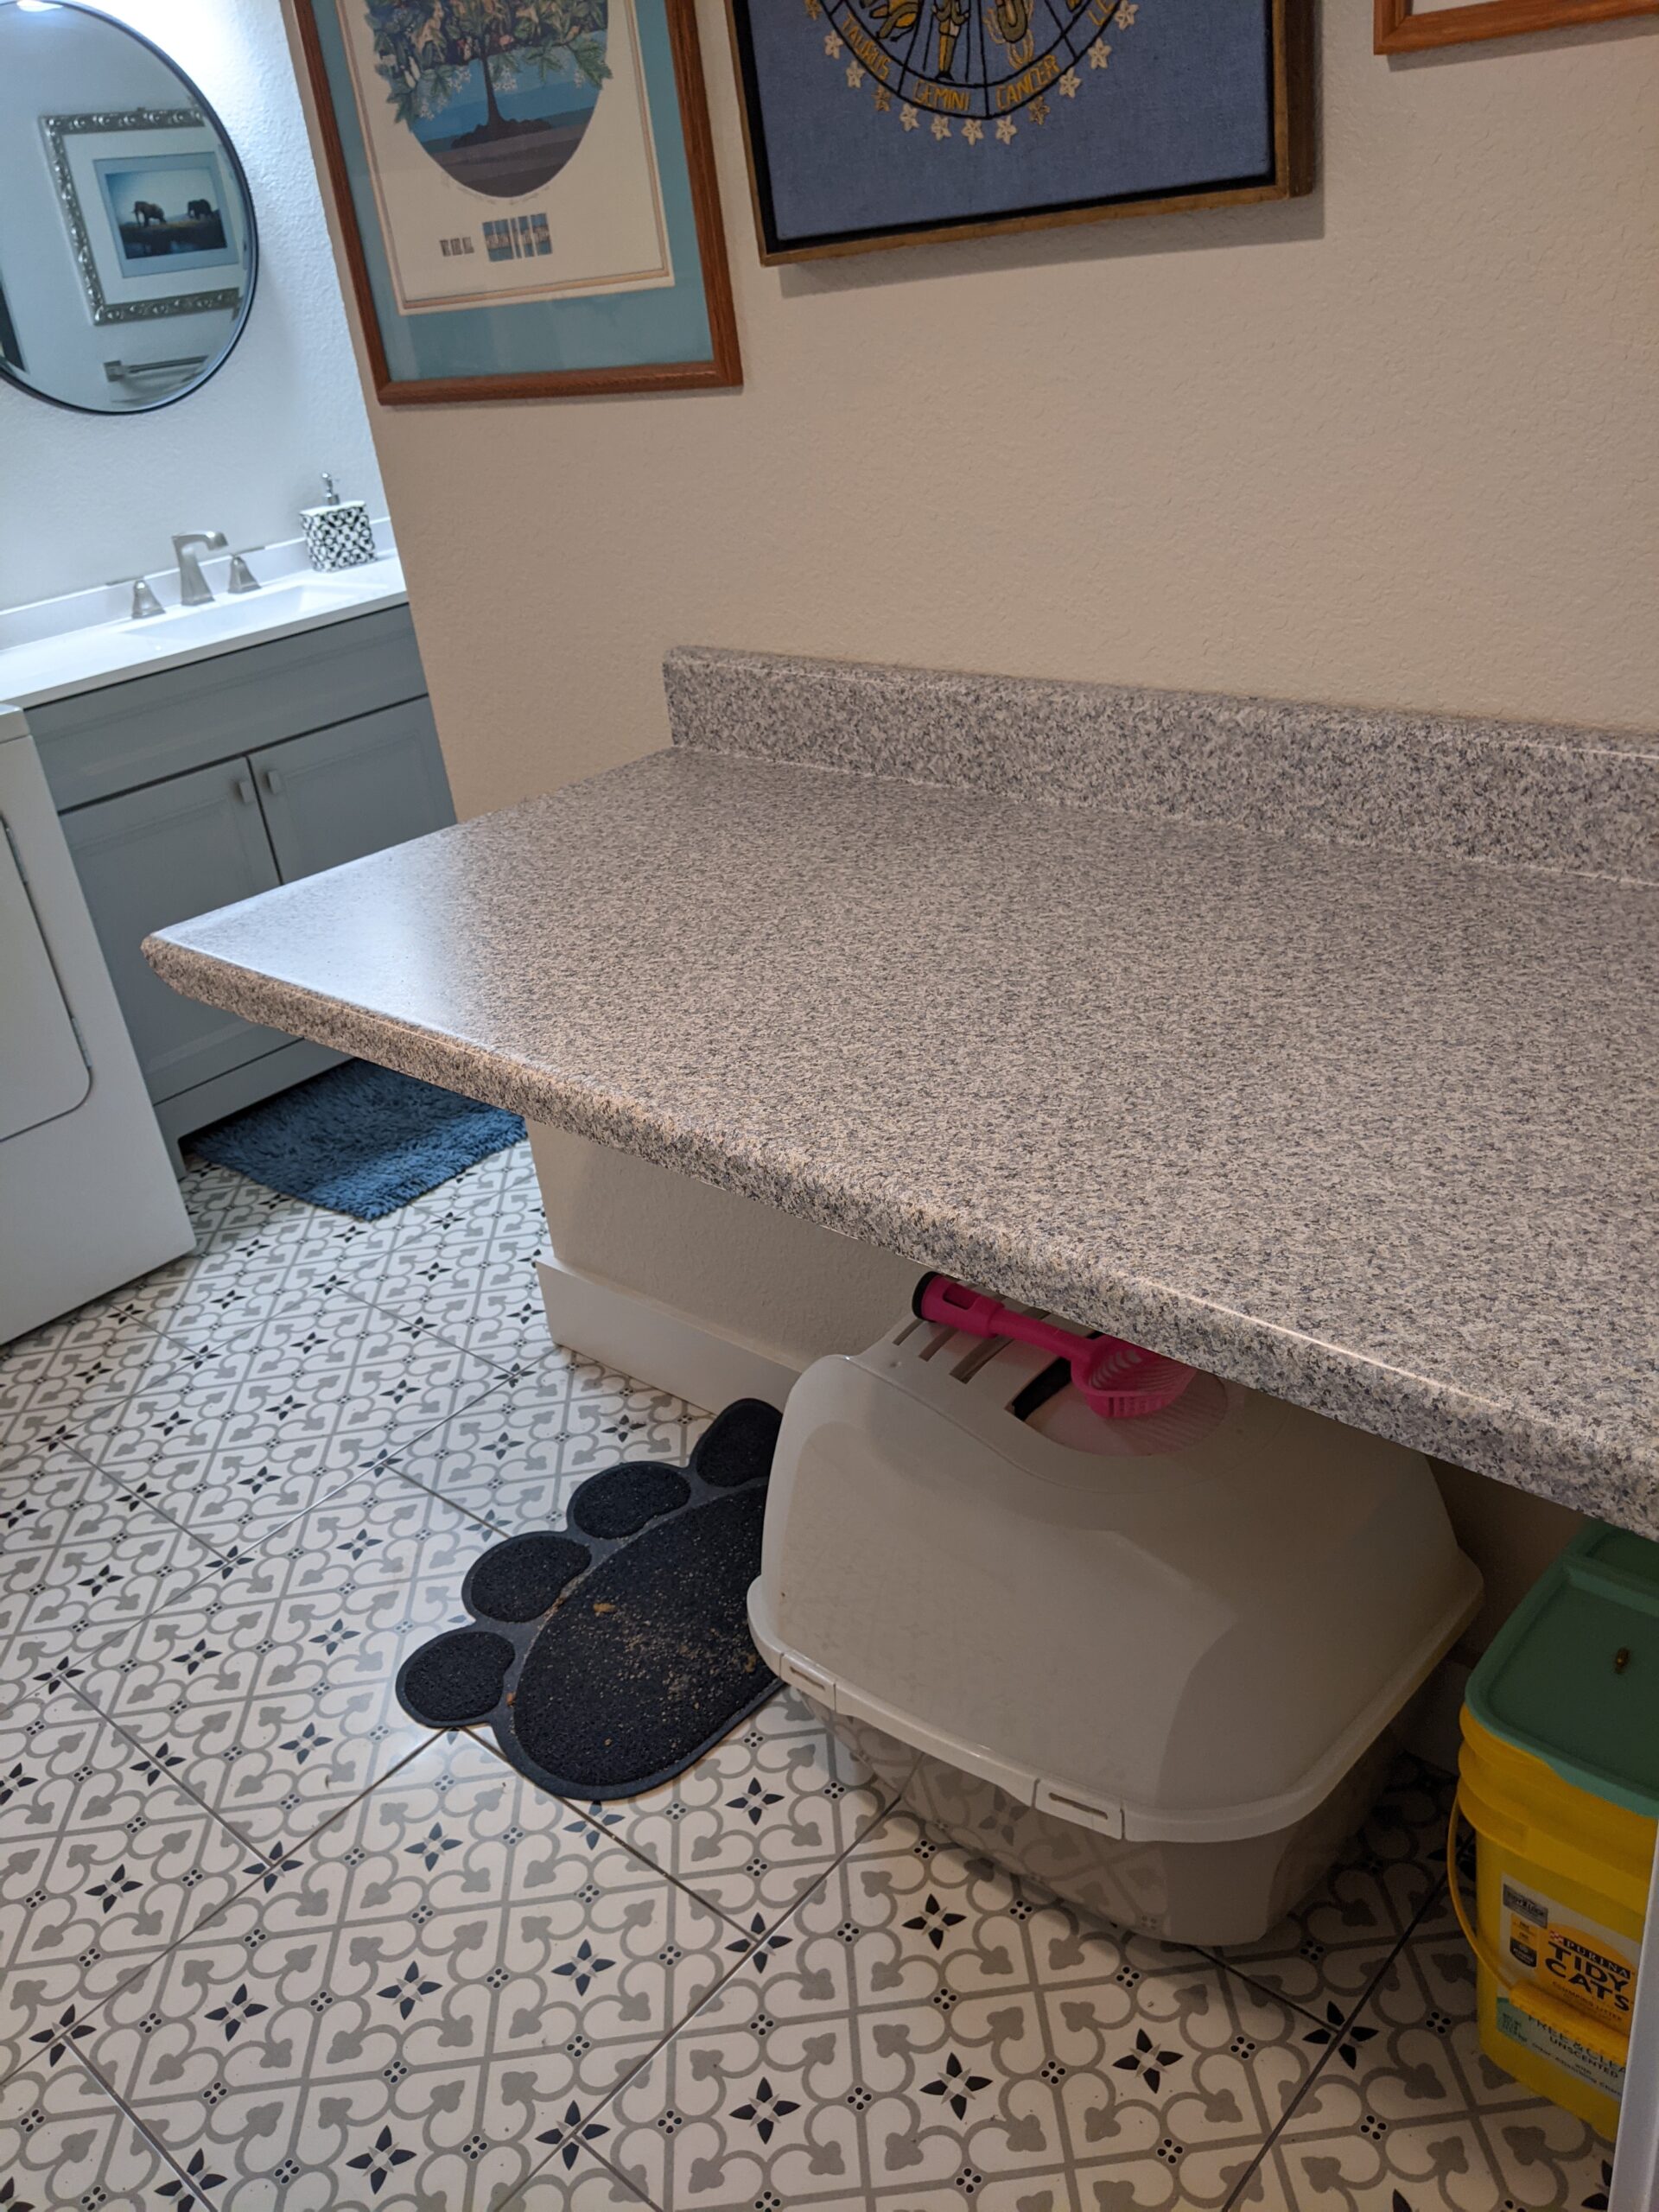 AFTER We covered and reused this countertop as a folding station in our basement’s combination bathroom/laundry room.